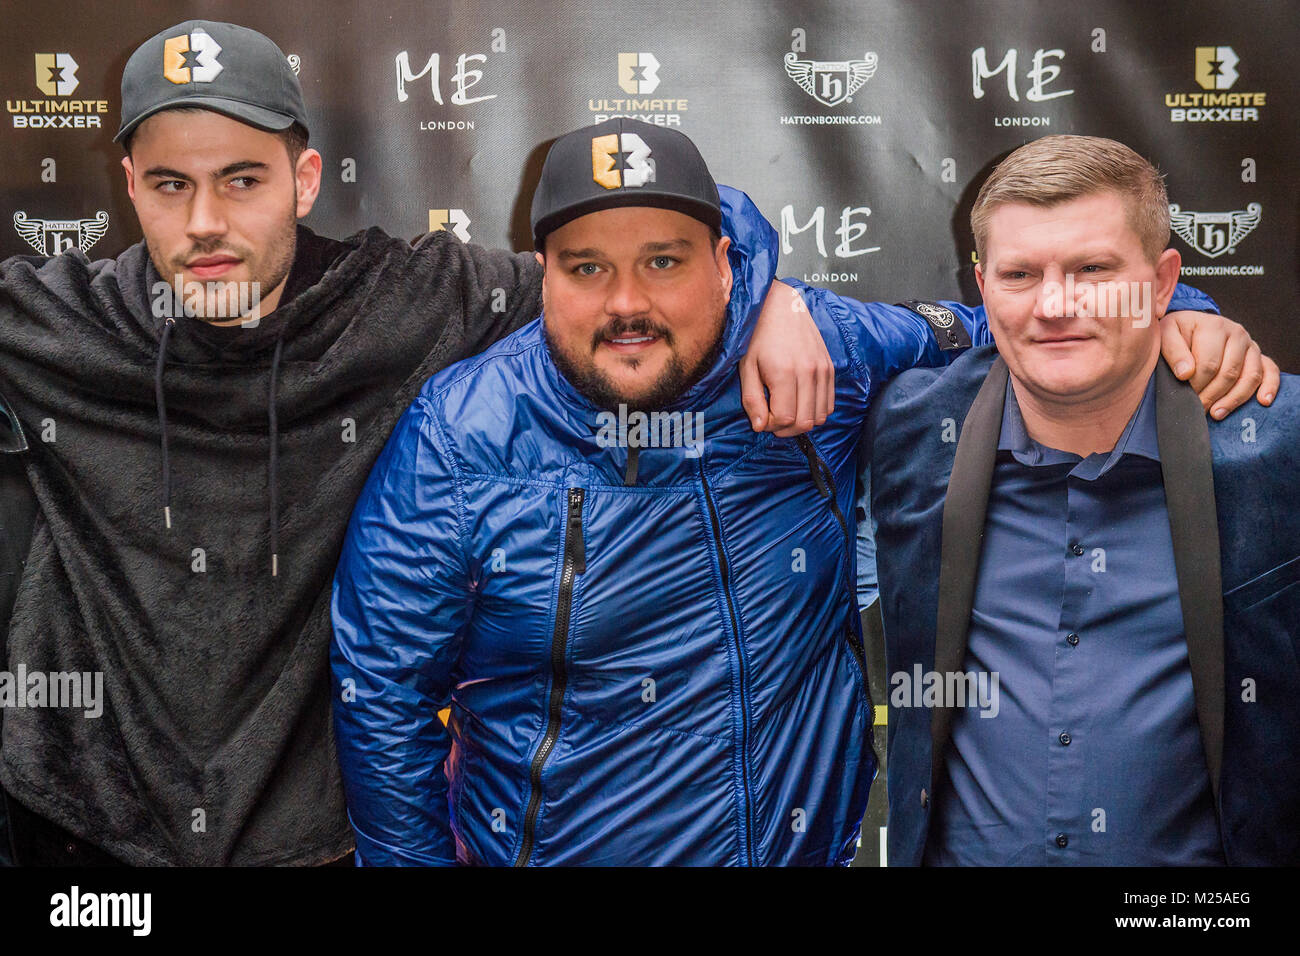 London, UK. 5th February, 2018. Benjamin Shalkon (founder), DJ Charlie Sloth with Ricky Hatton - The official launch of ULTIMATE BOXER, Britain’s first Boxing Entertainment brand, at ME London Hotel. The single elimination format, approved by the British Boxing Board of Control, will give young untapped talented British professional-boxers life changing career opportunities, with large cash prizes on offer for the tournament champion. Credit: Guy Bell/Alamy Live News Stock Photo